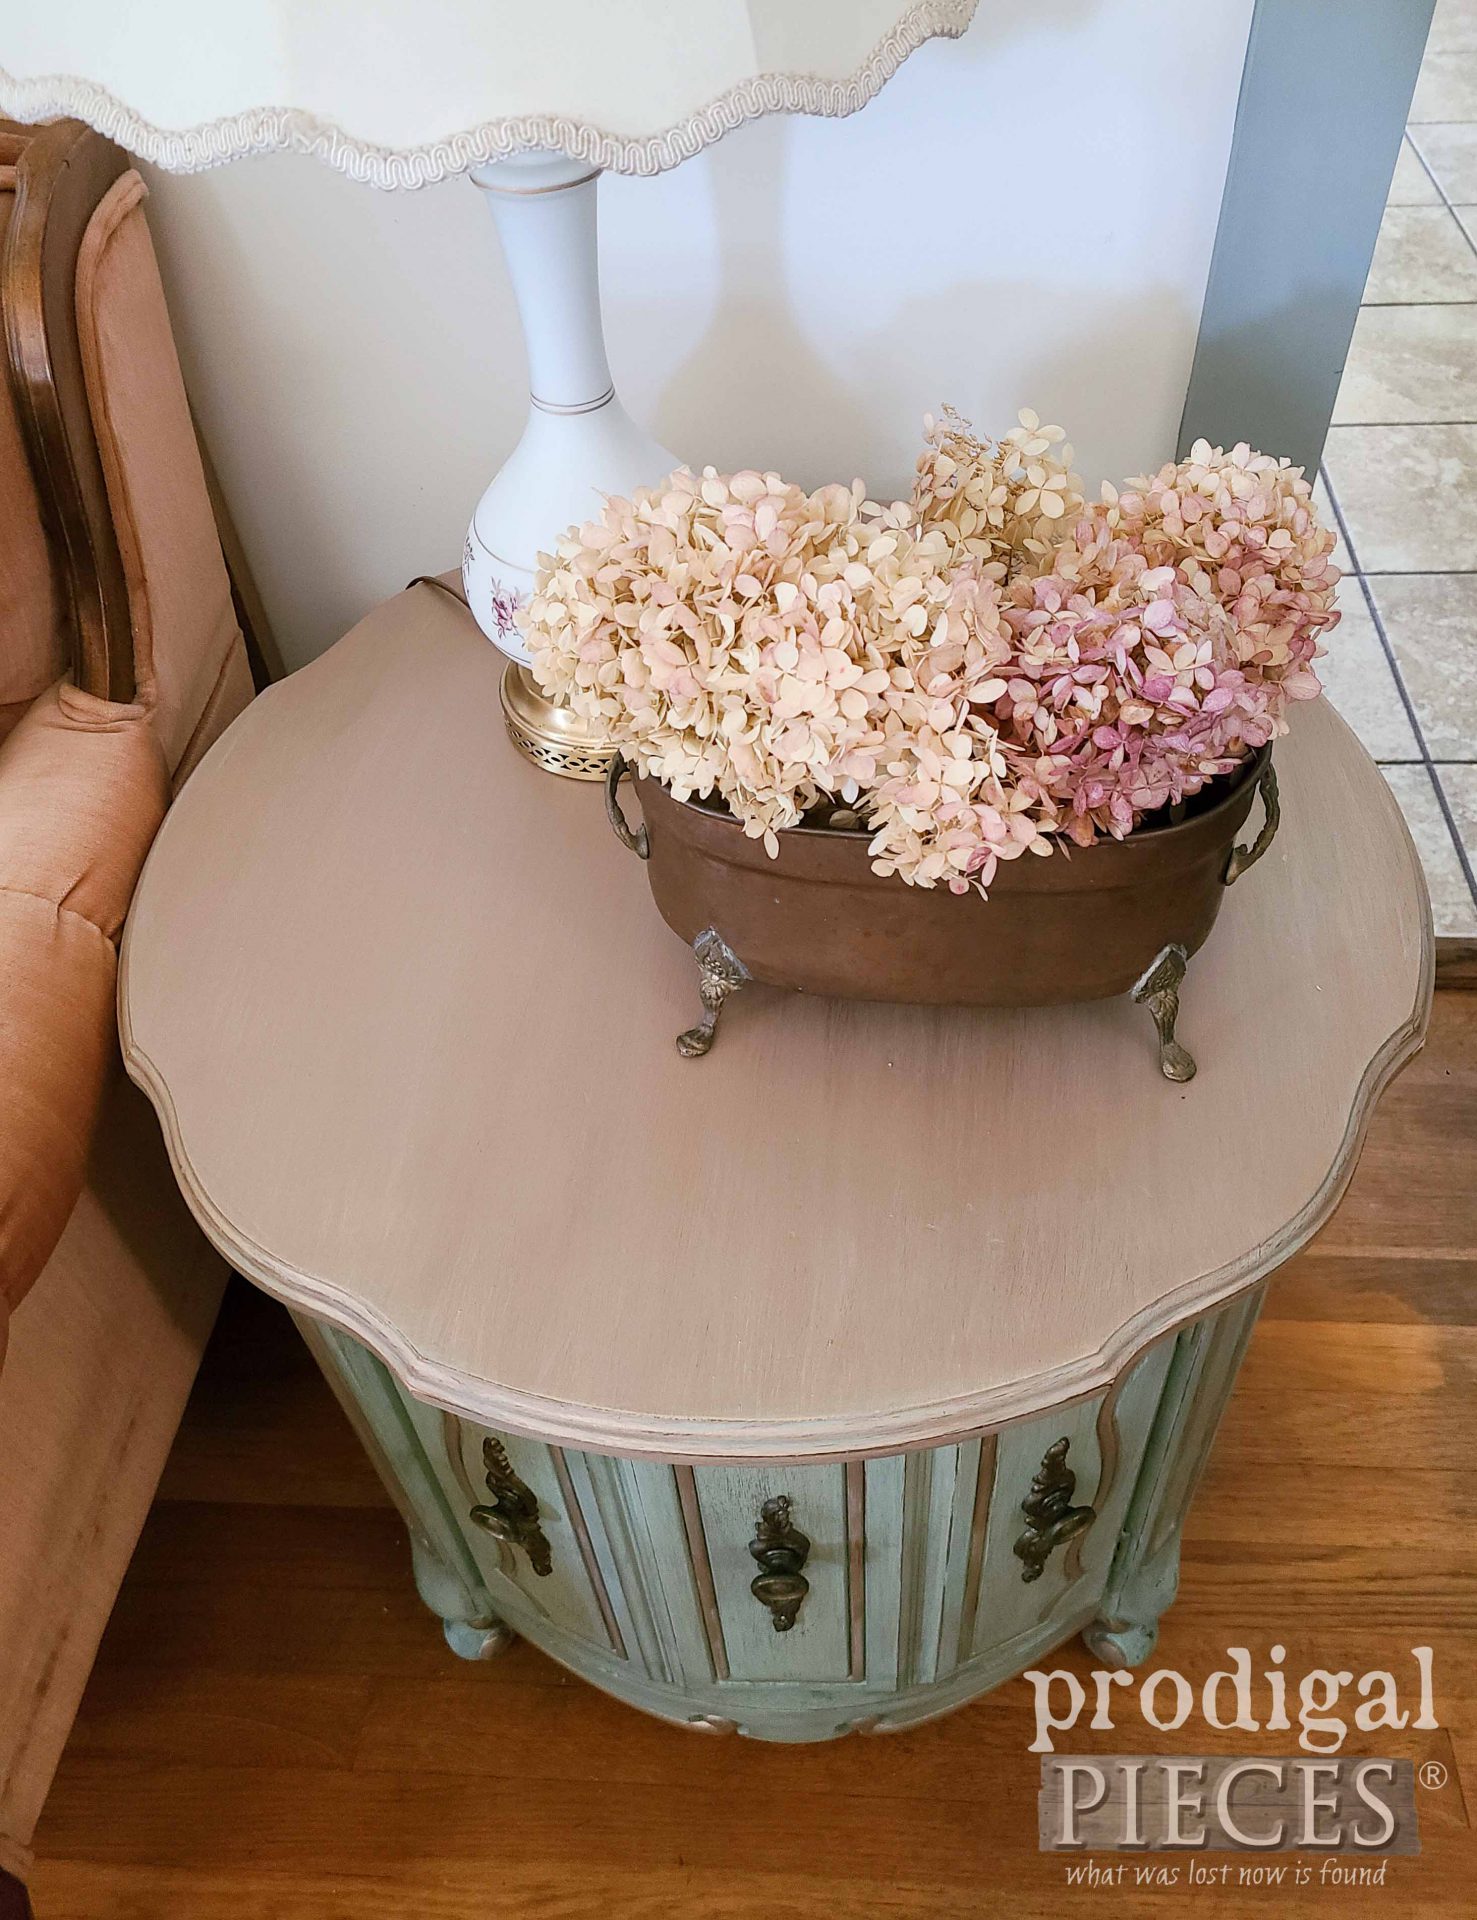 Vintage French Provincial Side Table Top with Metallic Wash Top by Larissa of Prodigal Pieces | prodigalpieces.com #prodigalpieces #table #furniture #french #diy